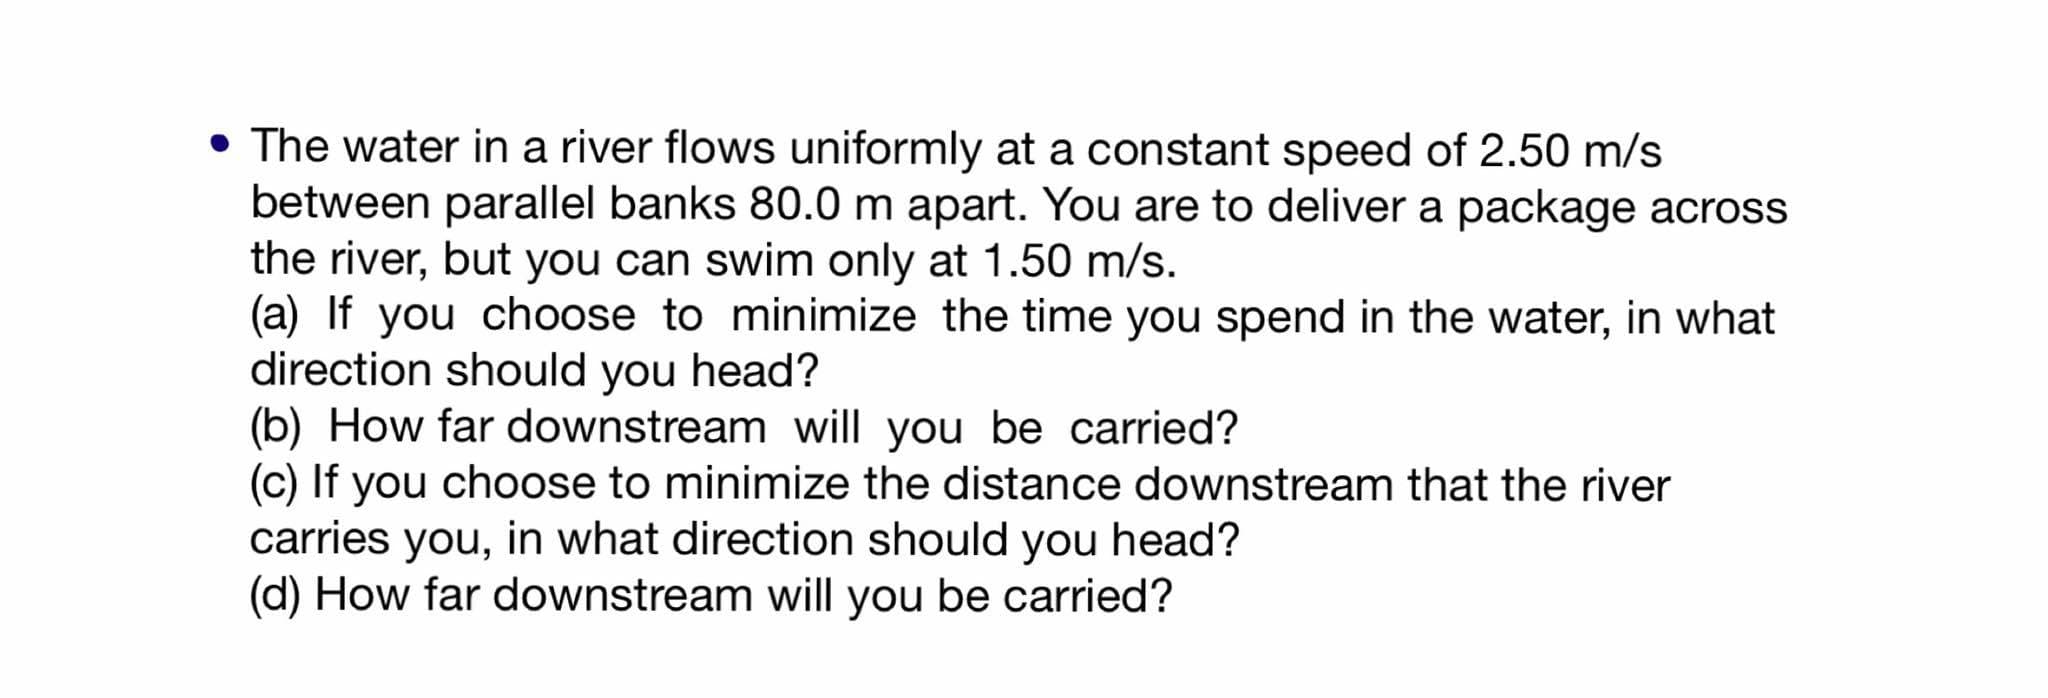 The water in a river flows uniformly at a constant speed of 2.50 m/s
between parallel banks 80.0 m apart. You are to deliver a package across
the river, but you can swim only at 1.50 m/s.
(a) If you choose to minimize the time you spend in the water, in what
direction should you head?
(b) How far downstream will you be carried?
(c) If you choose to minimize the distance downstream that the river
carries you, in what direction should you head?
